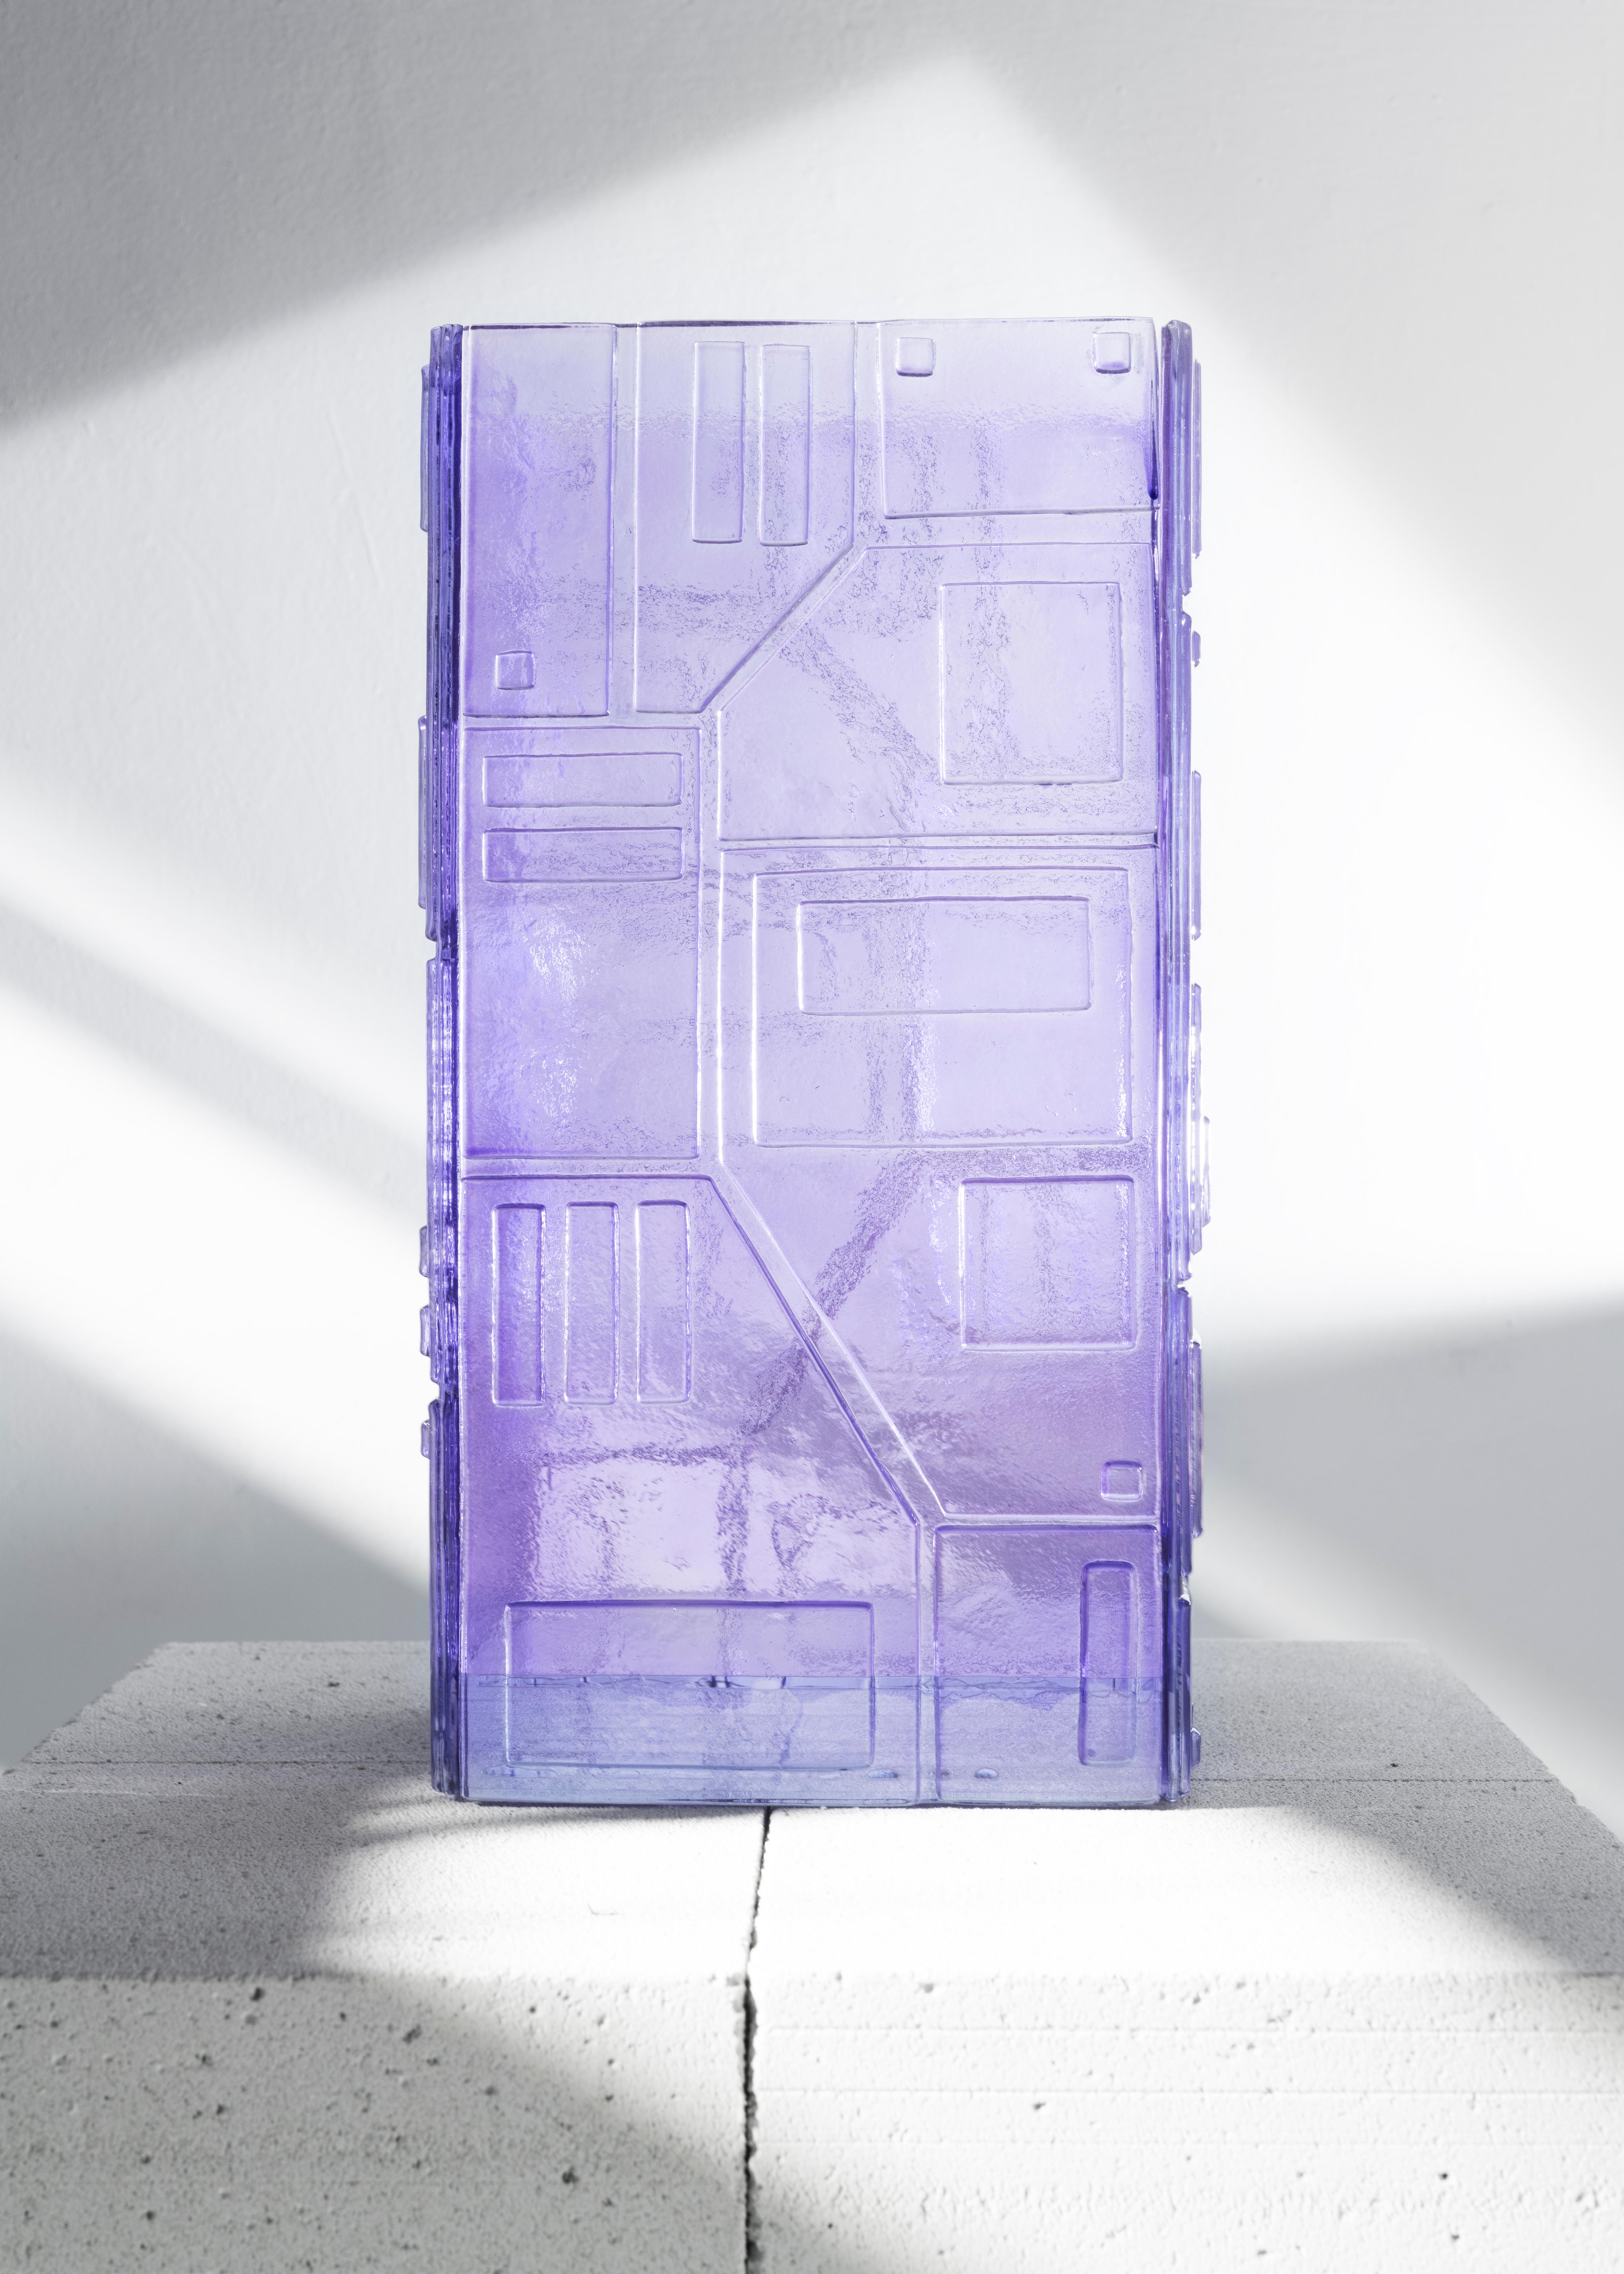 Analogic Sci-Fi Violet Vase by Mut Design
Limited Edition
Dimensions: D 25 x W 25 x H 45 cm.
Materials: Glass colored.

Inspired by computer motherboards and the flamboyant spacecrafts of the Starwars saga, this very limited edition of sci-fi vases